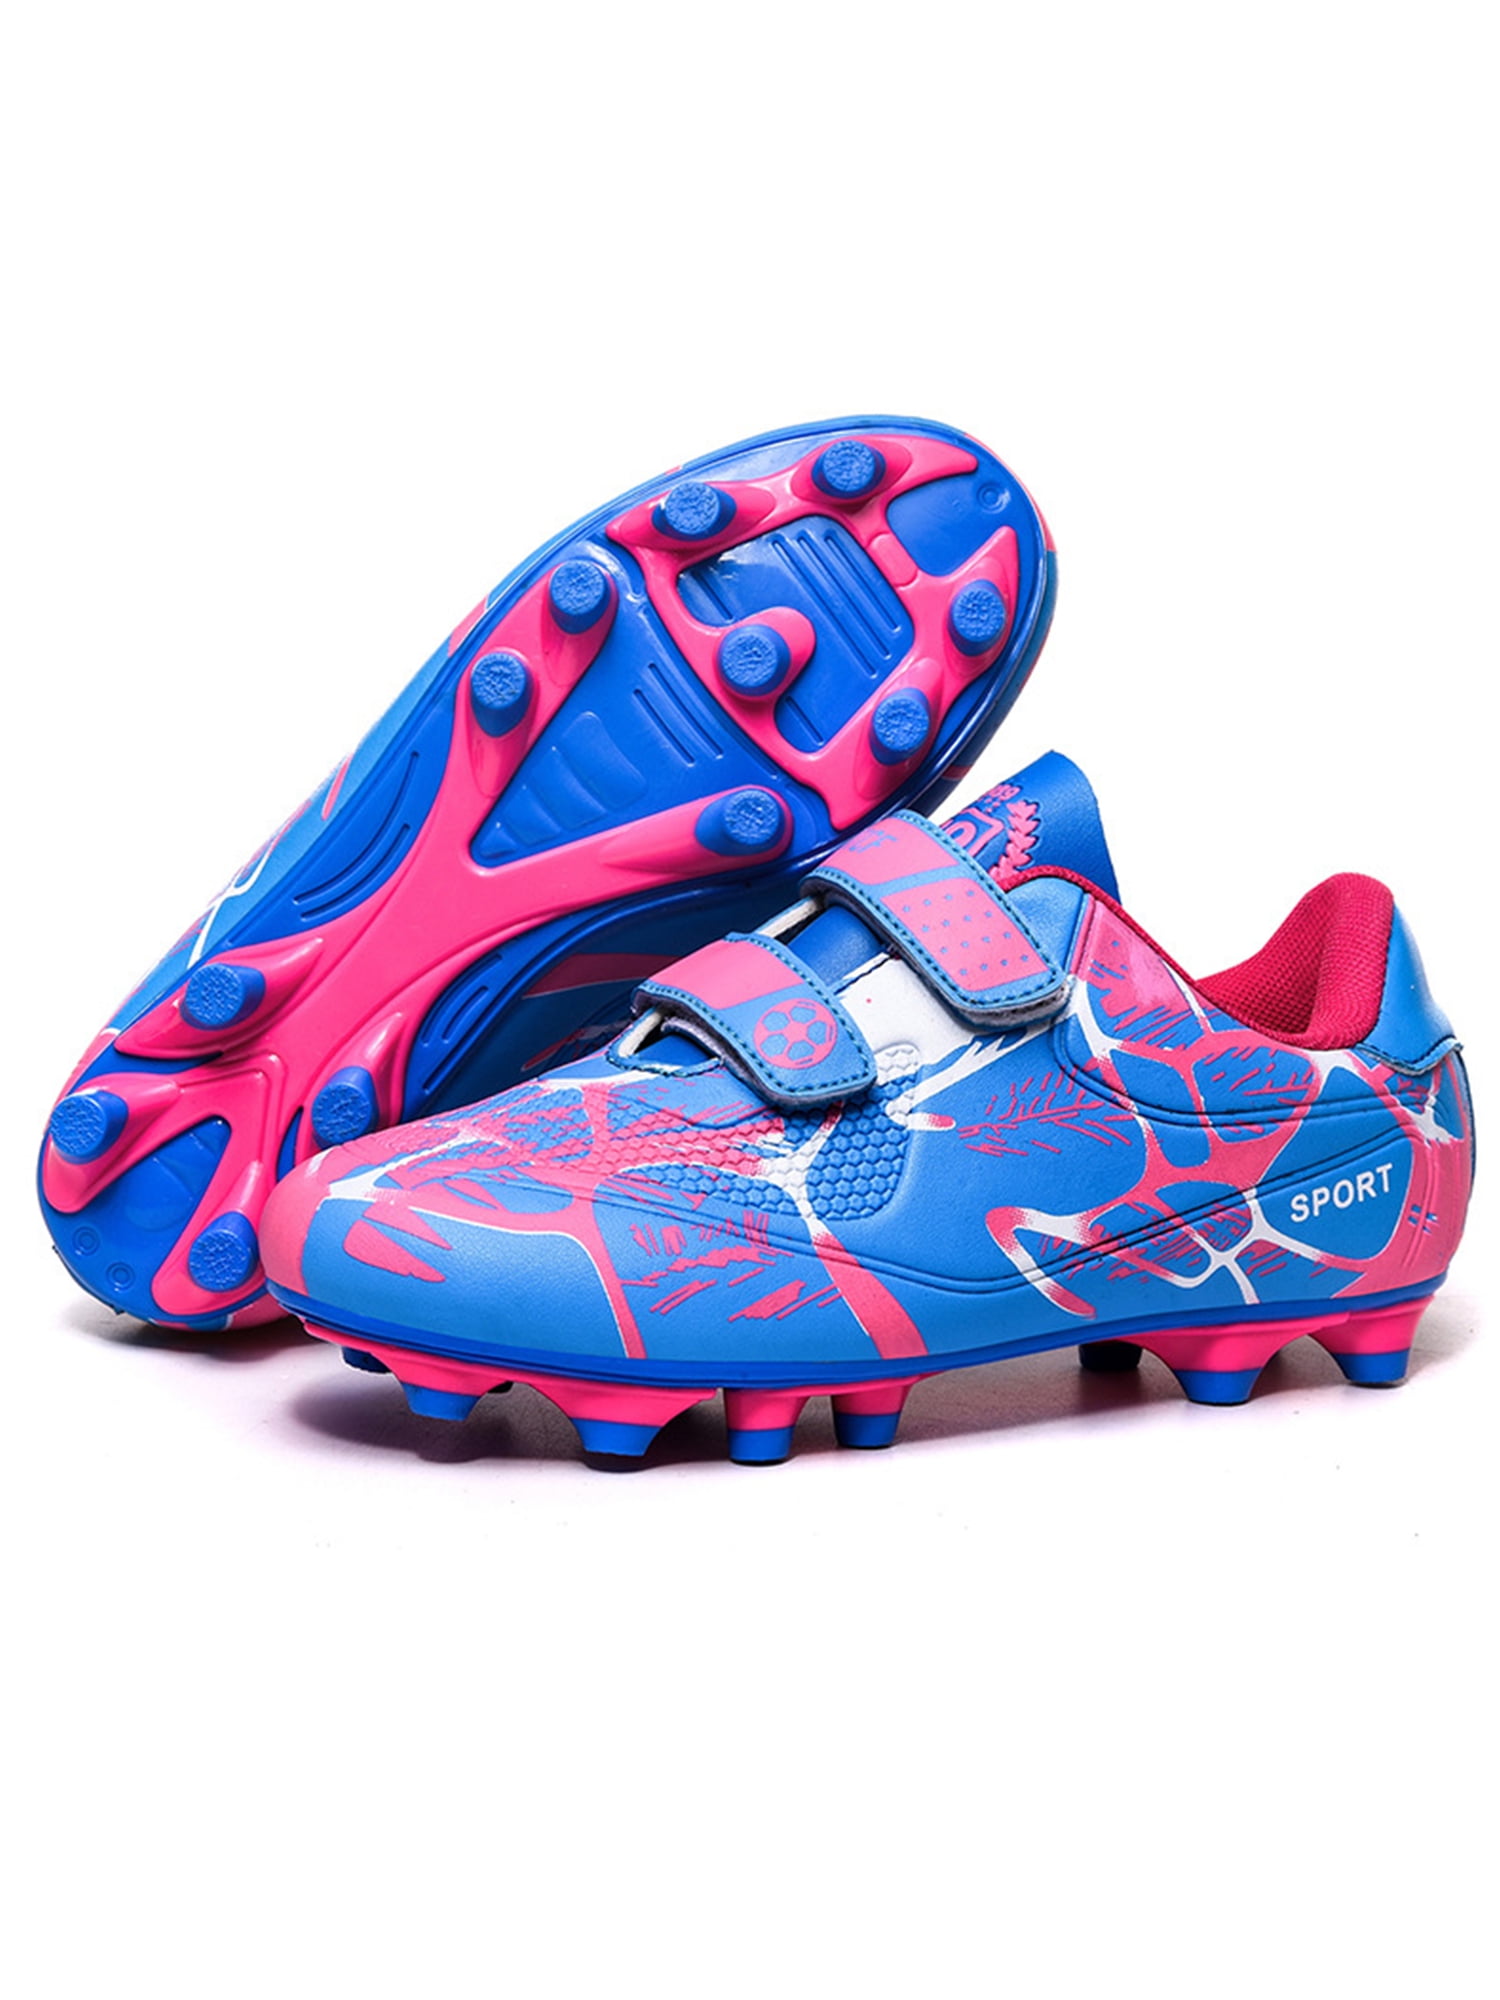 Ritualay Girls & Boys Shoes Football Boots Low Top Spikes Outdoor Athletic Training - Walmart.com